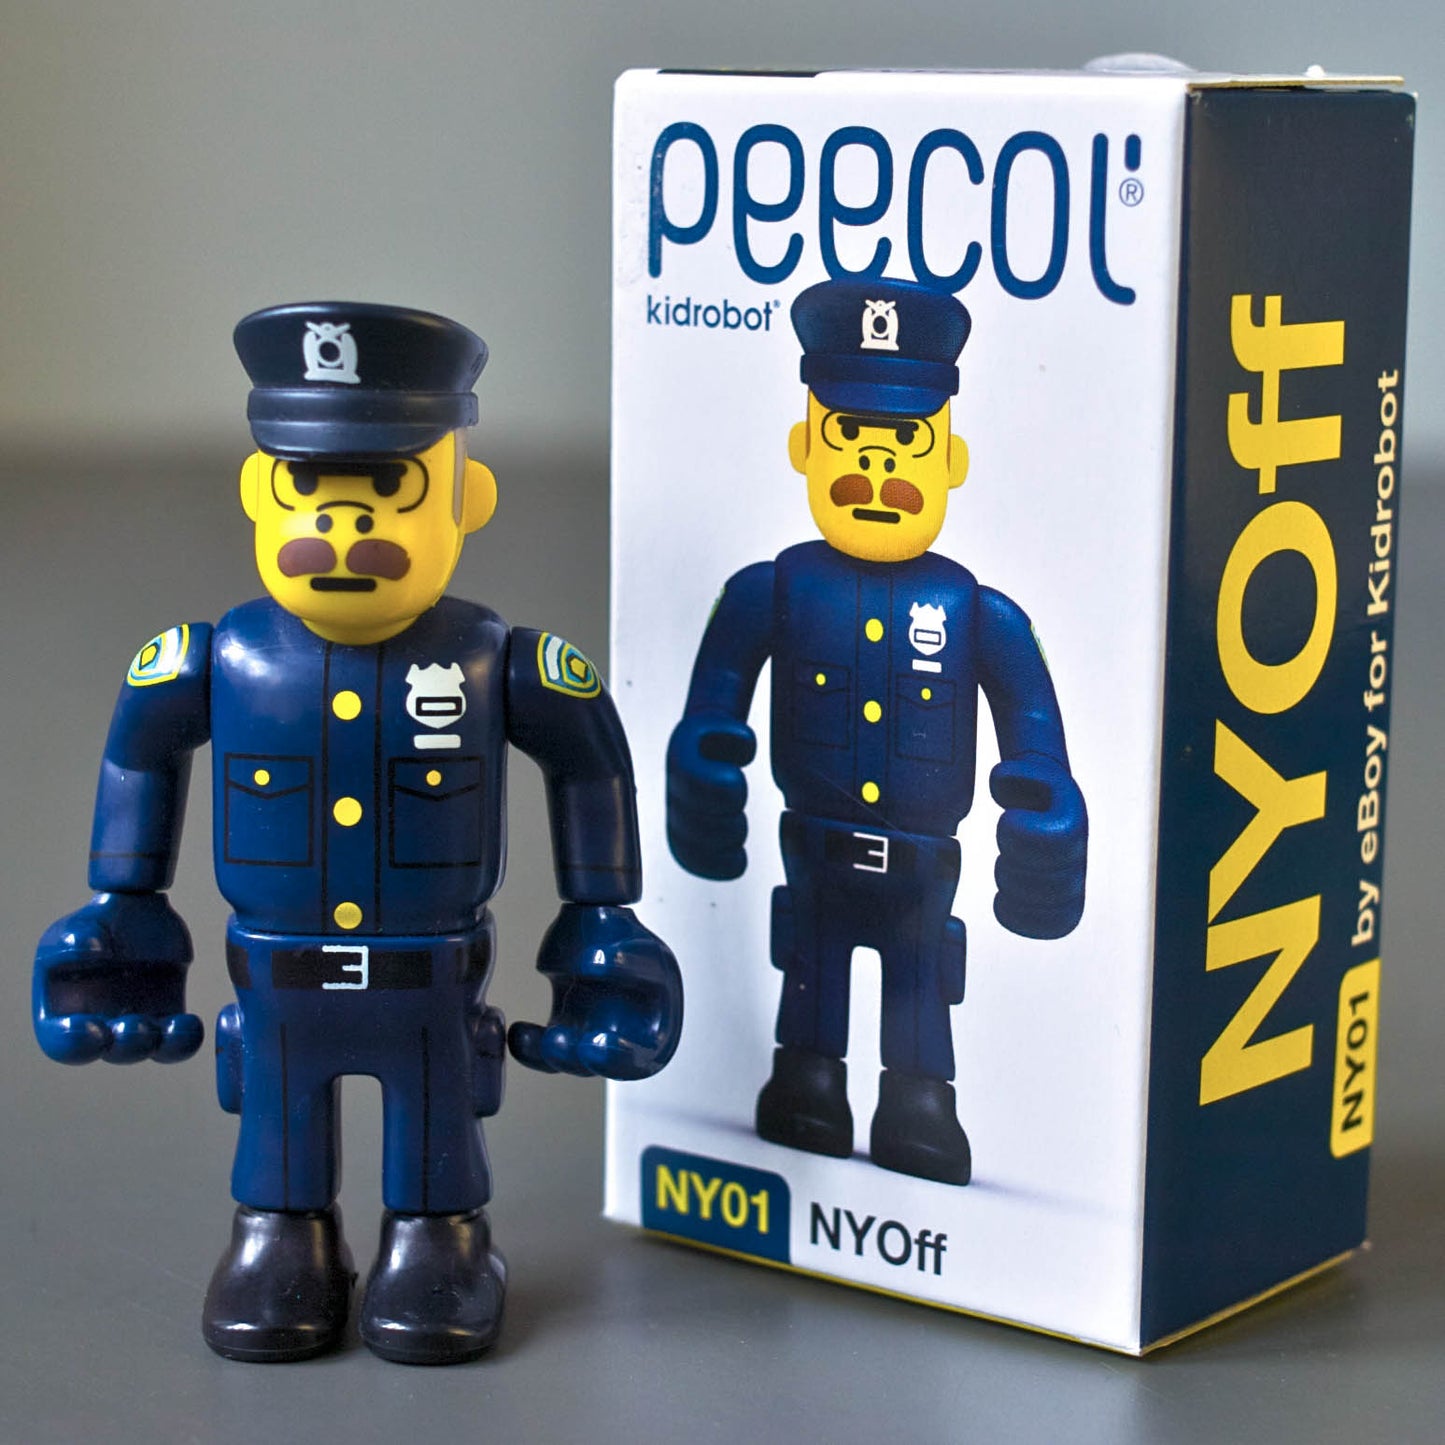 NYOff Peecol Toy by eBoy for Kidrobot